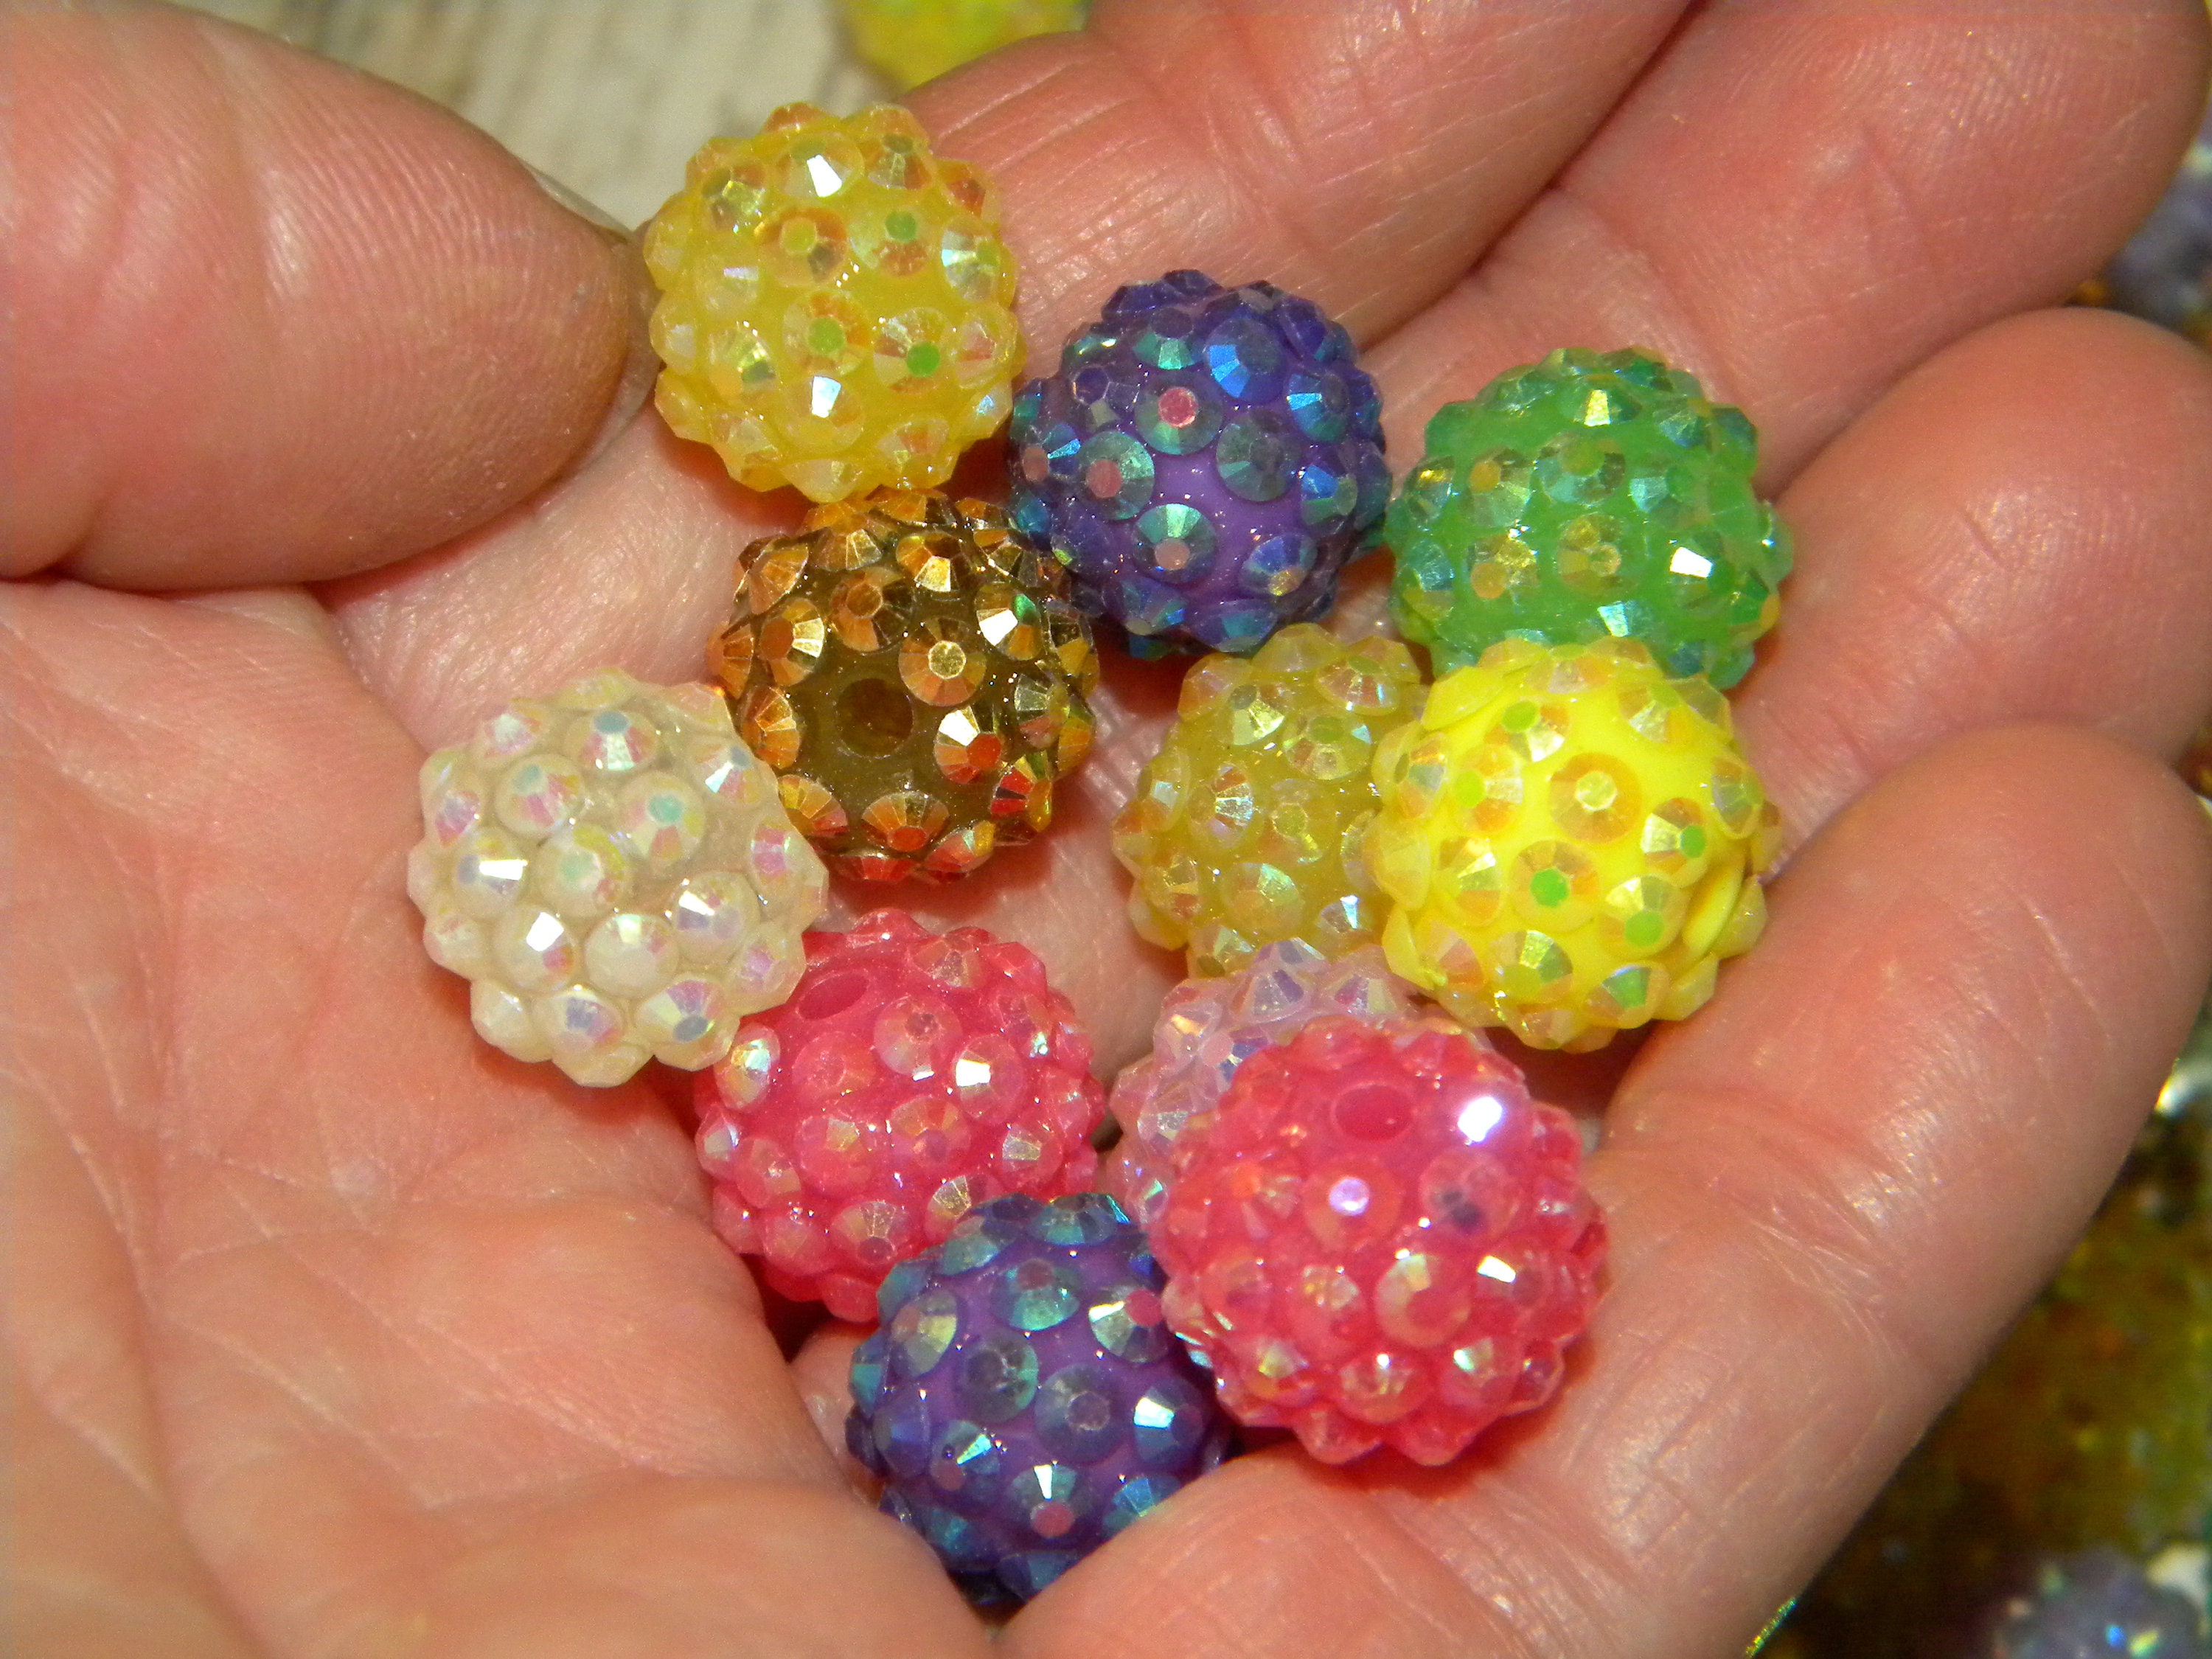 6mm Tiny Round Acrylic Beads - Gumball Bubblegum Plastic or Resin Beads -  Mixed Colors, Small Size Beads - 500 pc set